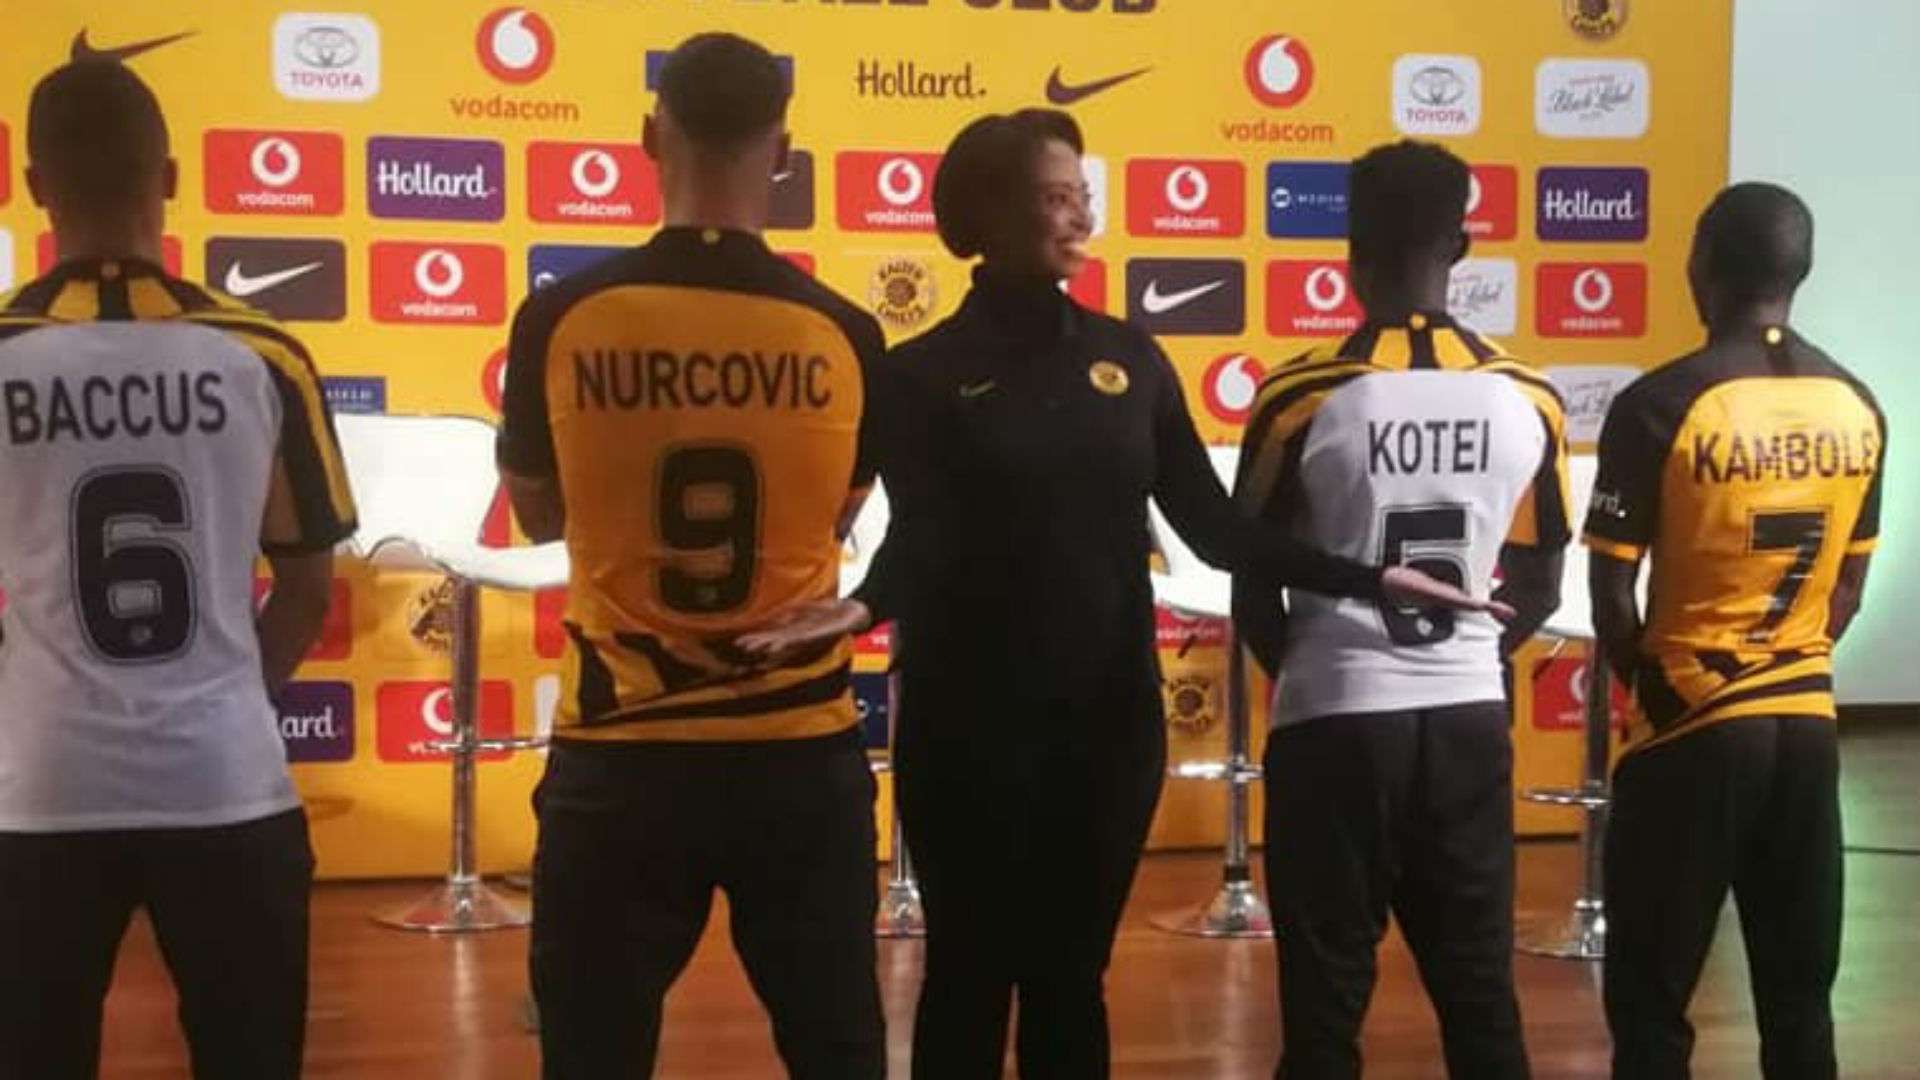 Kaizer Chiefs new signings